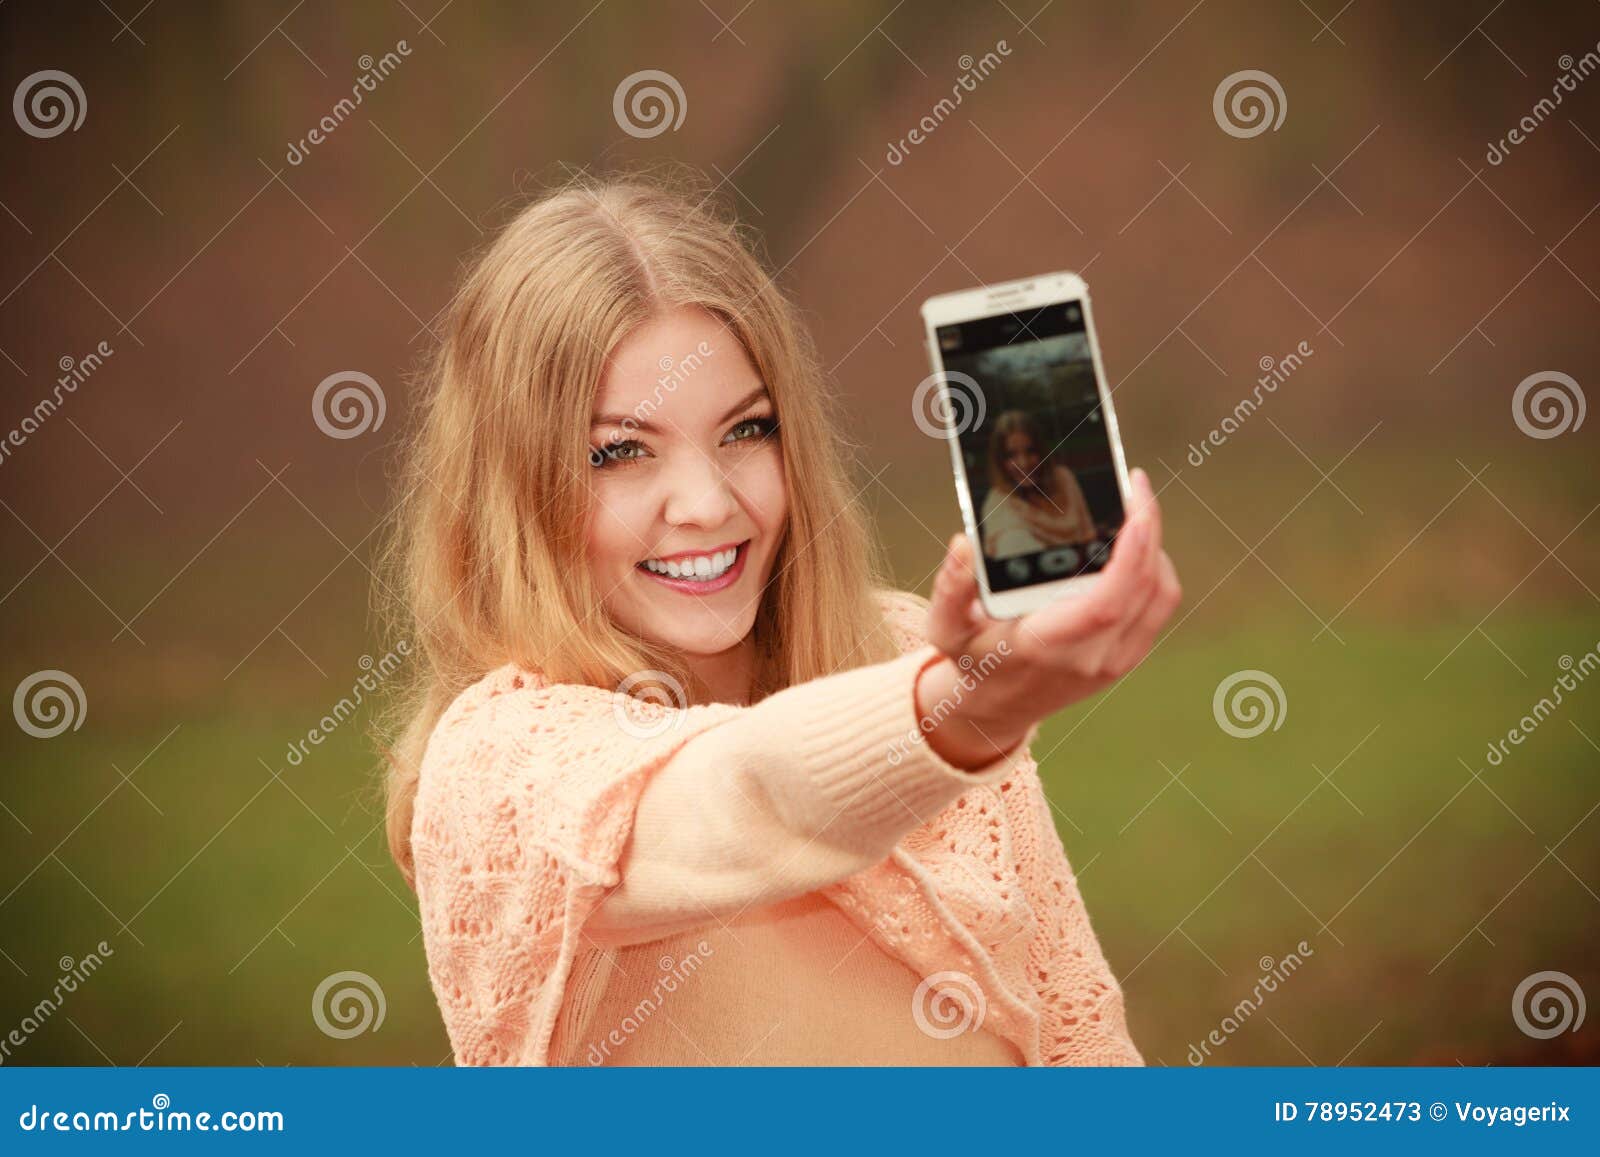 Blonde girl taking a selfie with her hair down - wide 2